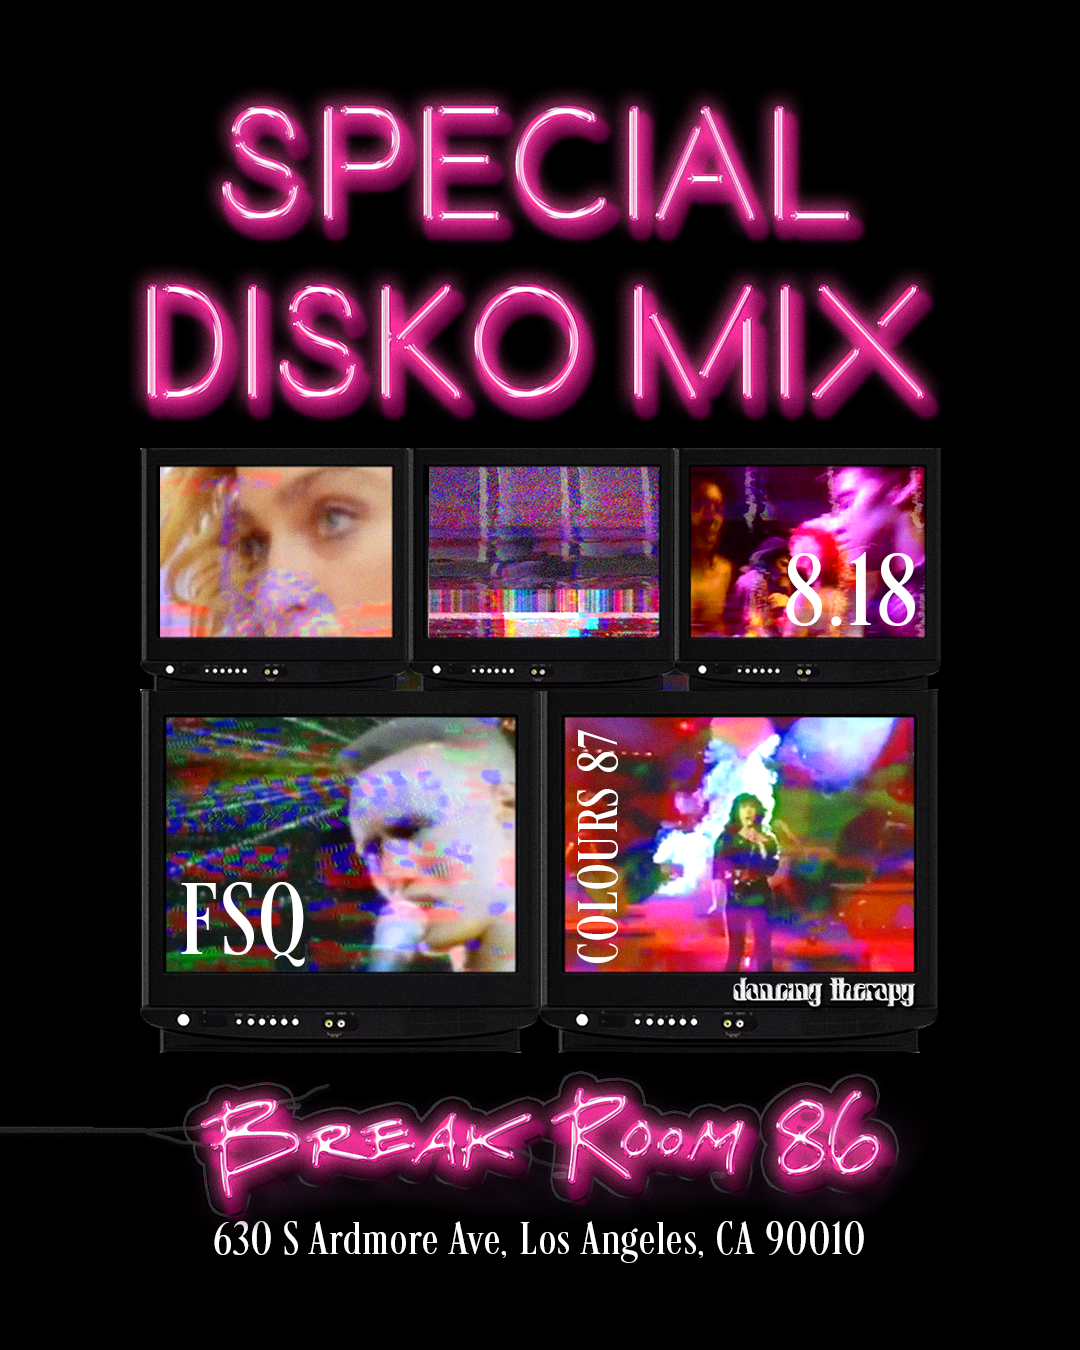 DANCING THERAPY: SPECIAL DISKO MIX (80's Edition) - フライヤー表